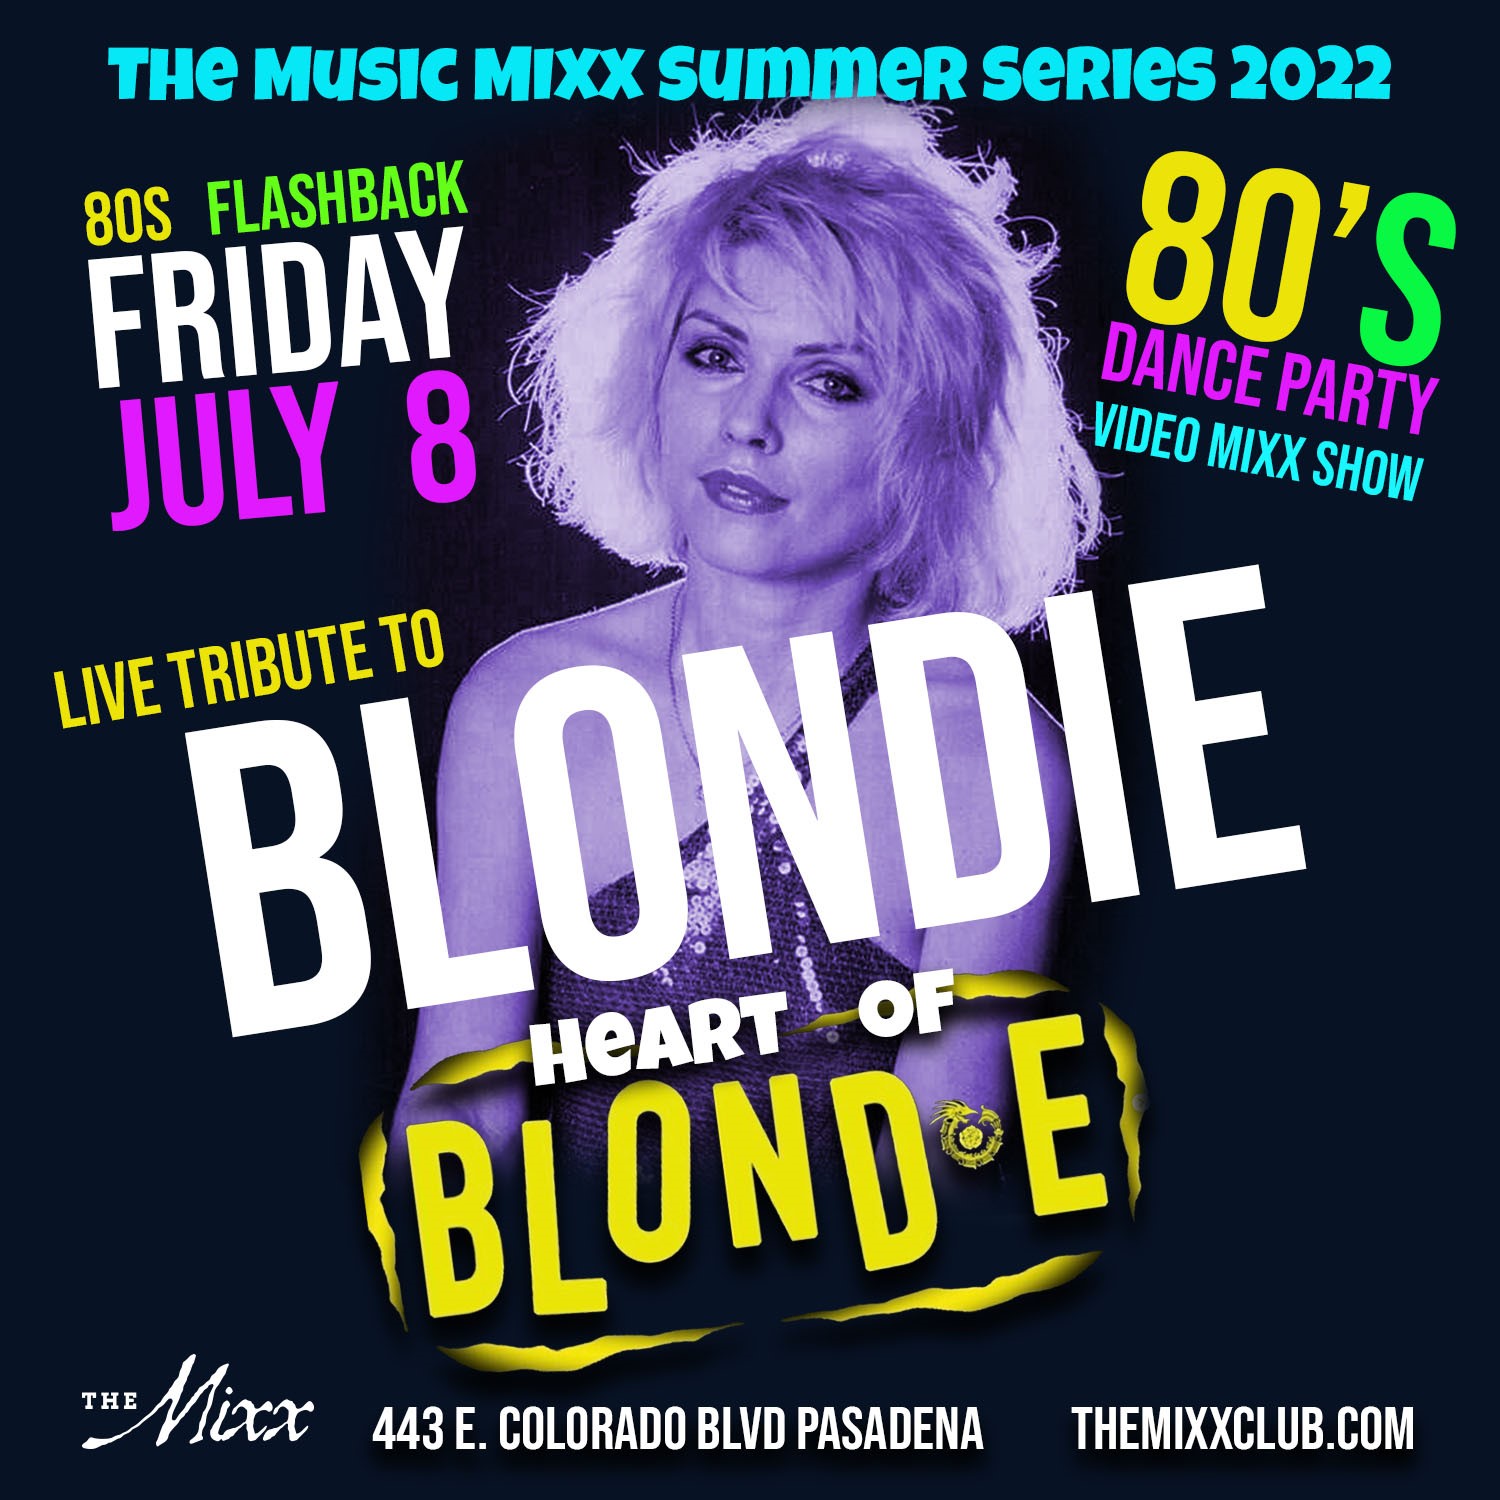 You are currently viewing 80s Flash Back with a live tribute to Blondie by Blond E